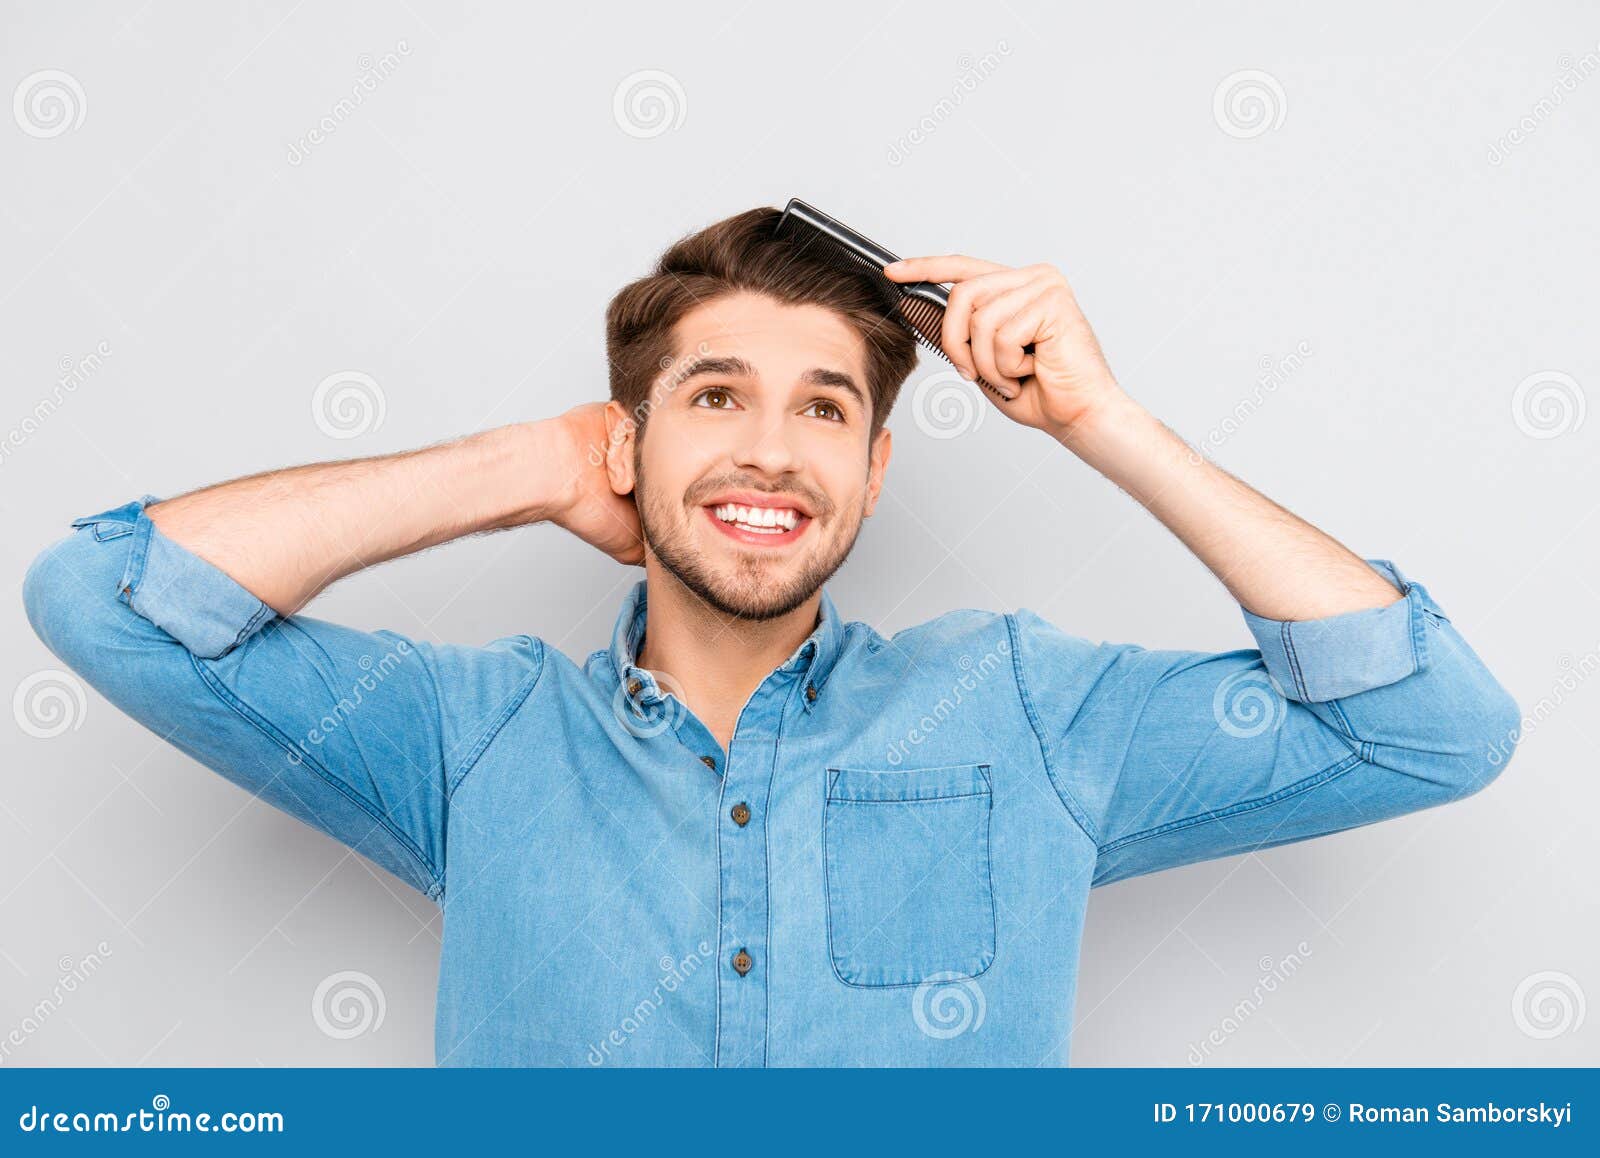 portrait of handsome cheerful young man combing his hair